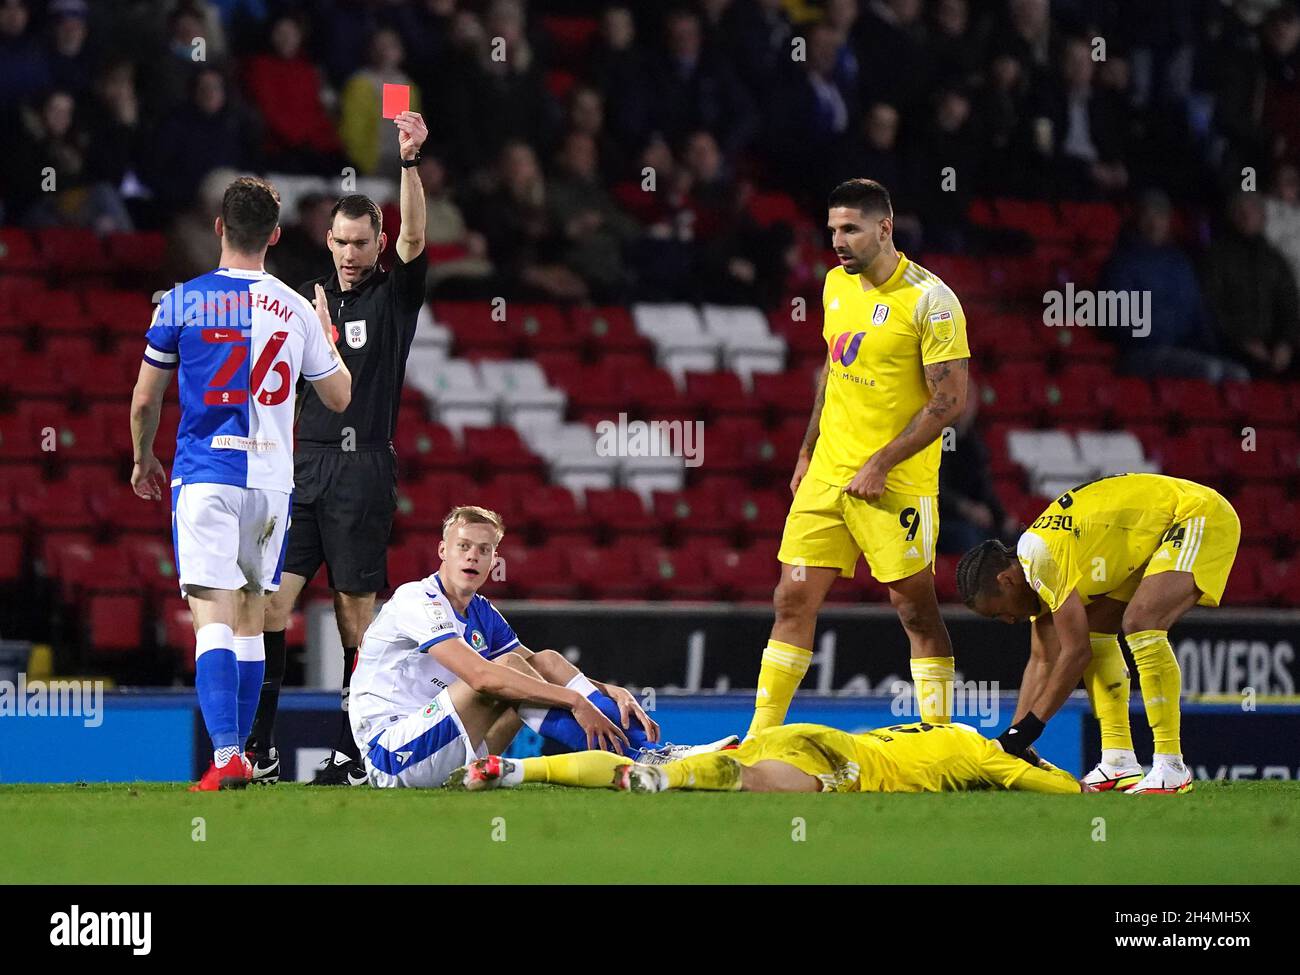 Blackburn Rovers' Jan Paul van Hecke (third right) is shown a straight red card by referee Jarred Gillett after a foul on Fulham's Harry Wilson during the Sky Bet Championship match at Ewood Park, Blackburn. Picture date: Wednesday November 3, 2021. Stock Photo